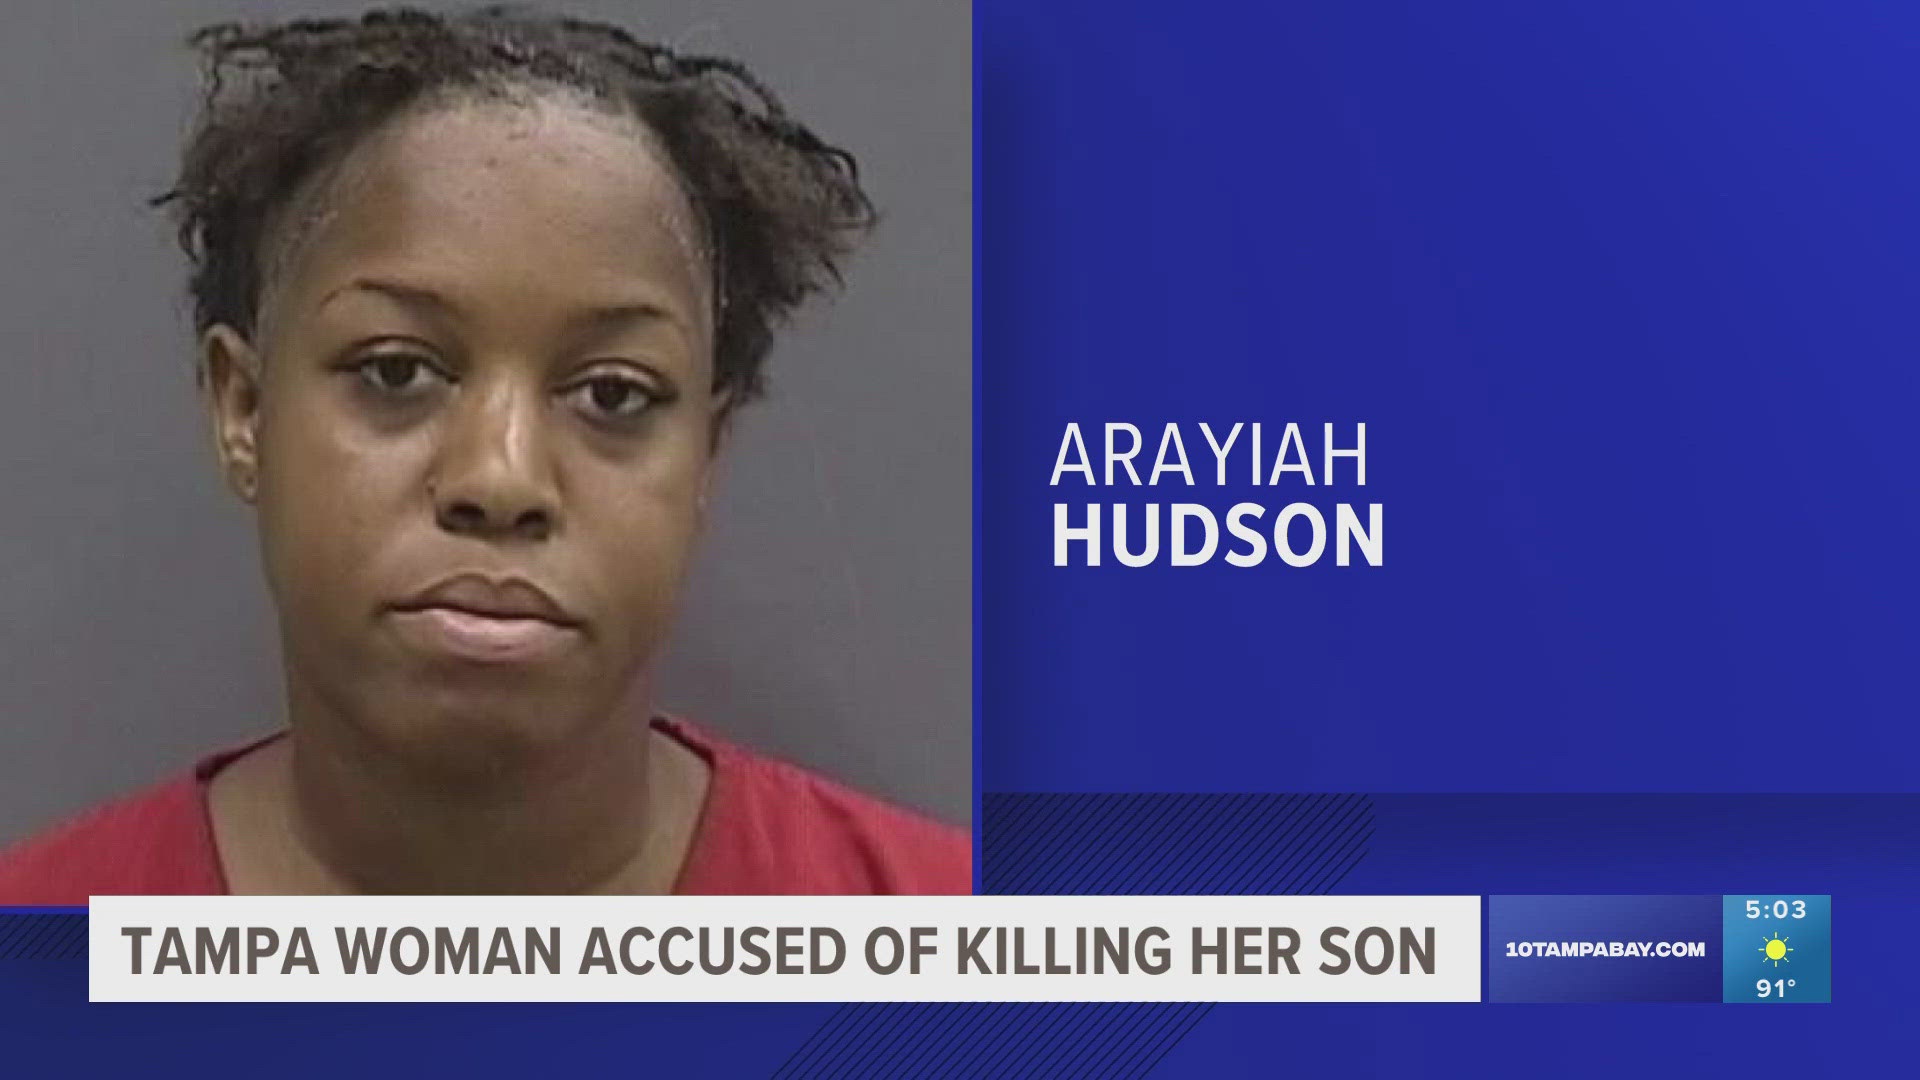 She called 911 and told them her son was unresponsive after he choked on food, but police said the child died from being hit in the head and torso.